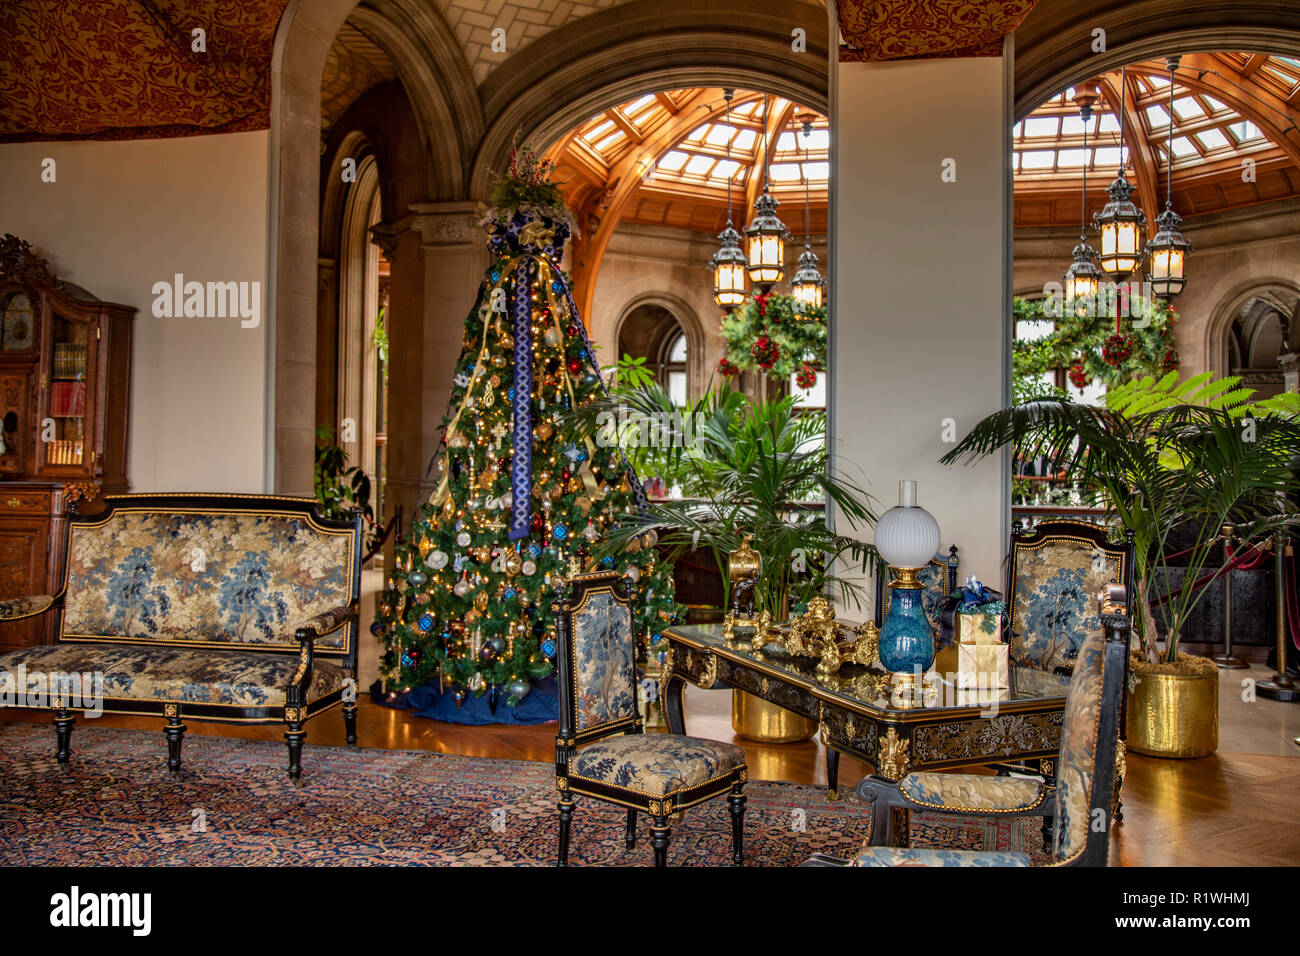 Interor Of The Biltmore Estate Decorated For Christmas Time